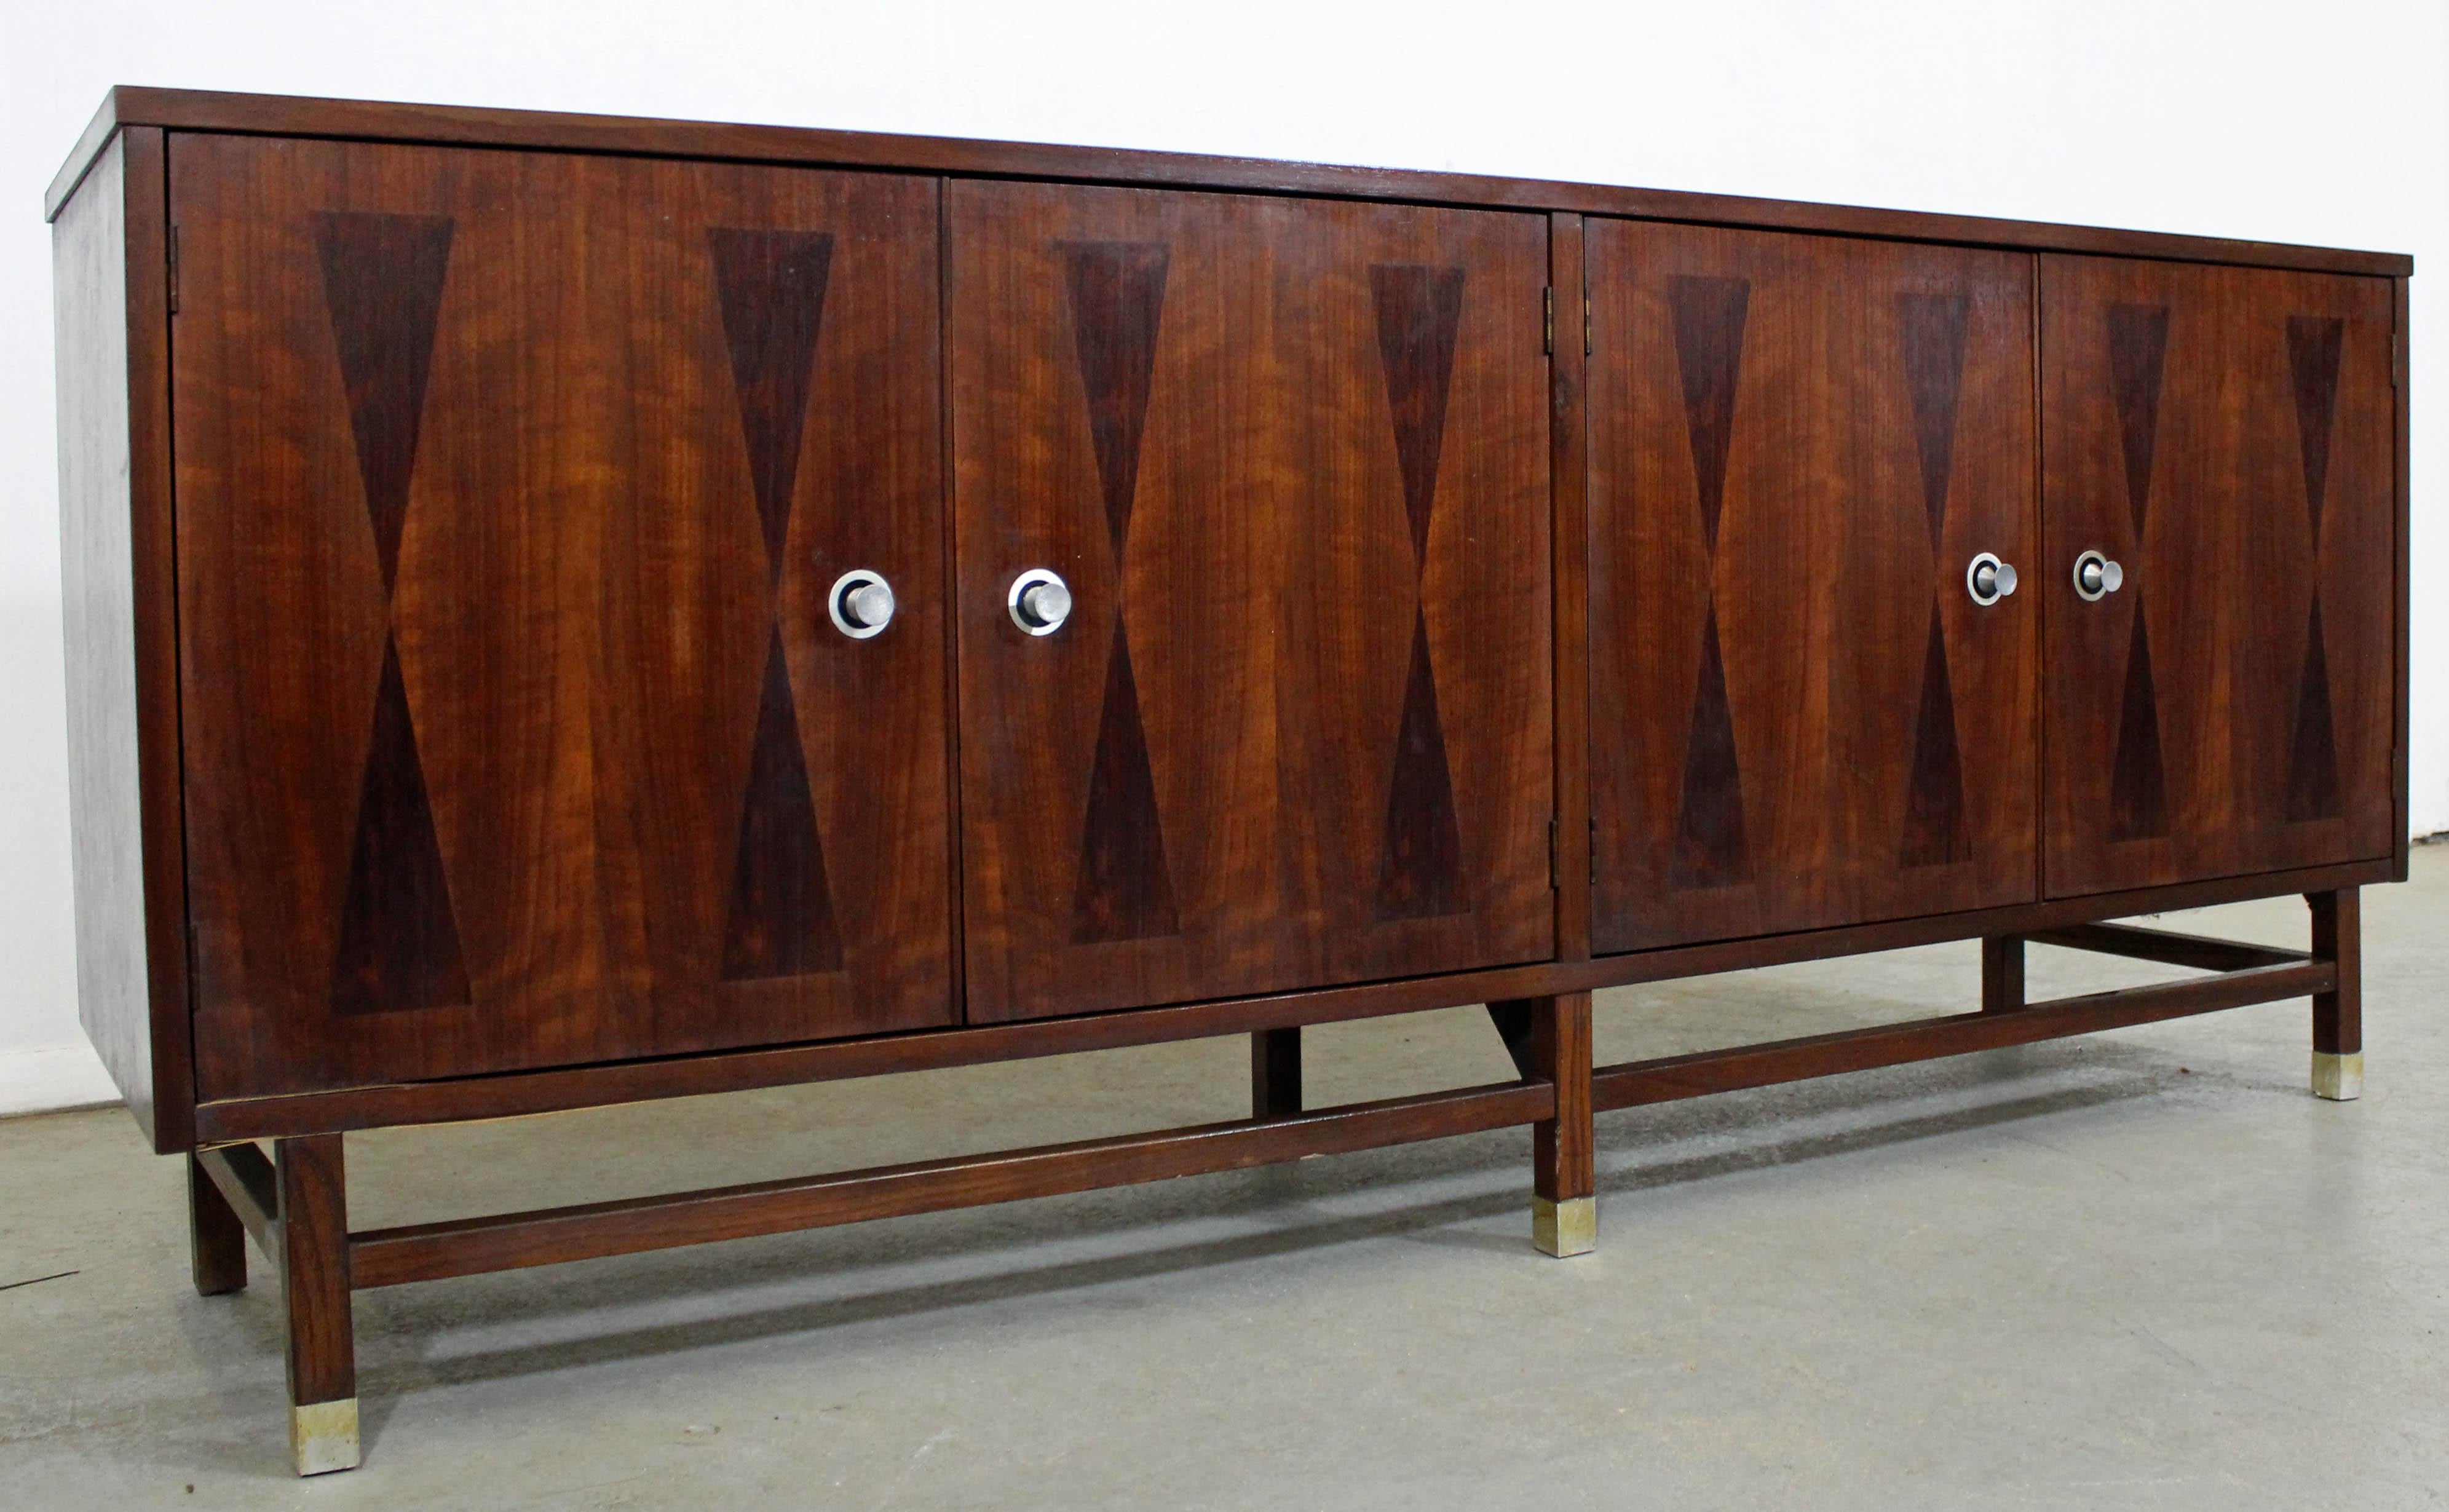 Offered is a beautiful Mid-Century Modern credenza with uniquely parqueted 'bow tie doors'. Features 4 doors with inside shelving on the right and three drawers on the left. It is in excellent condition for its age with refinished tops and sides,